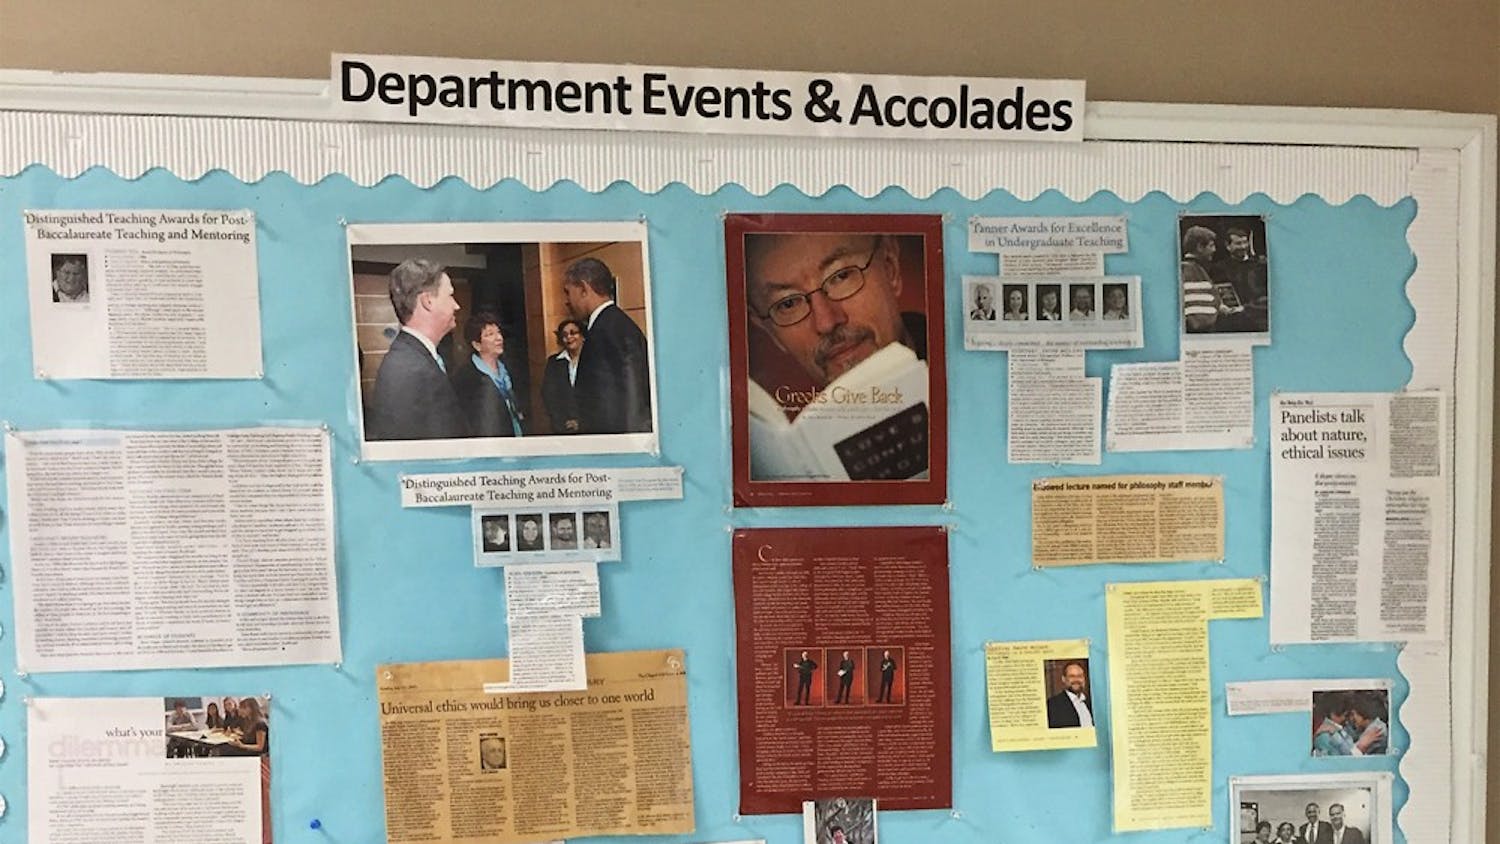 Jan Boxill is featured with Chancellor Folt and President Obama on a bulletin board in Caldwell Hall celebrating philosophy professors’ work.